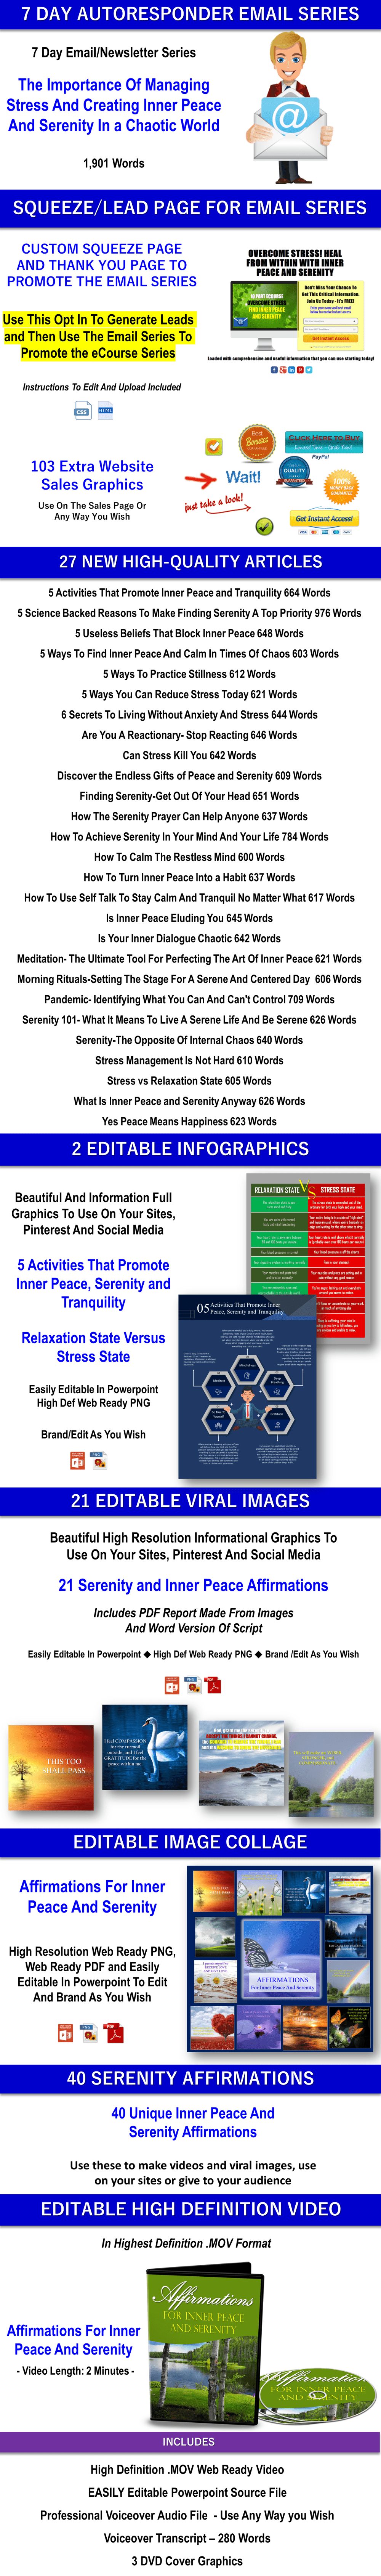 10 Part eCourse: Combat Stress - Find Inner Peace & Serenity Giant Content Pack Private Label Rights